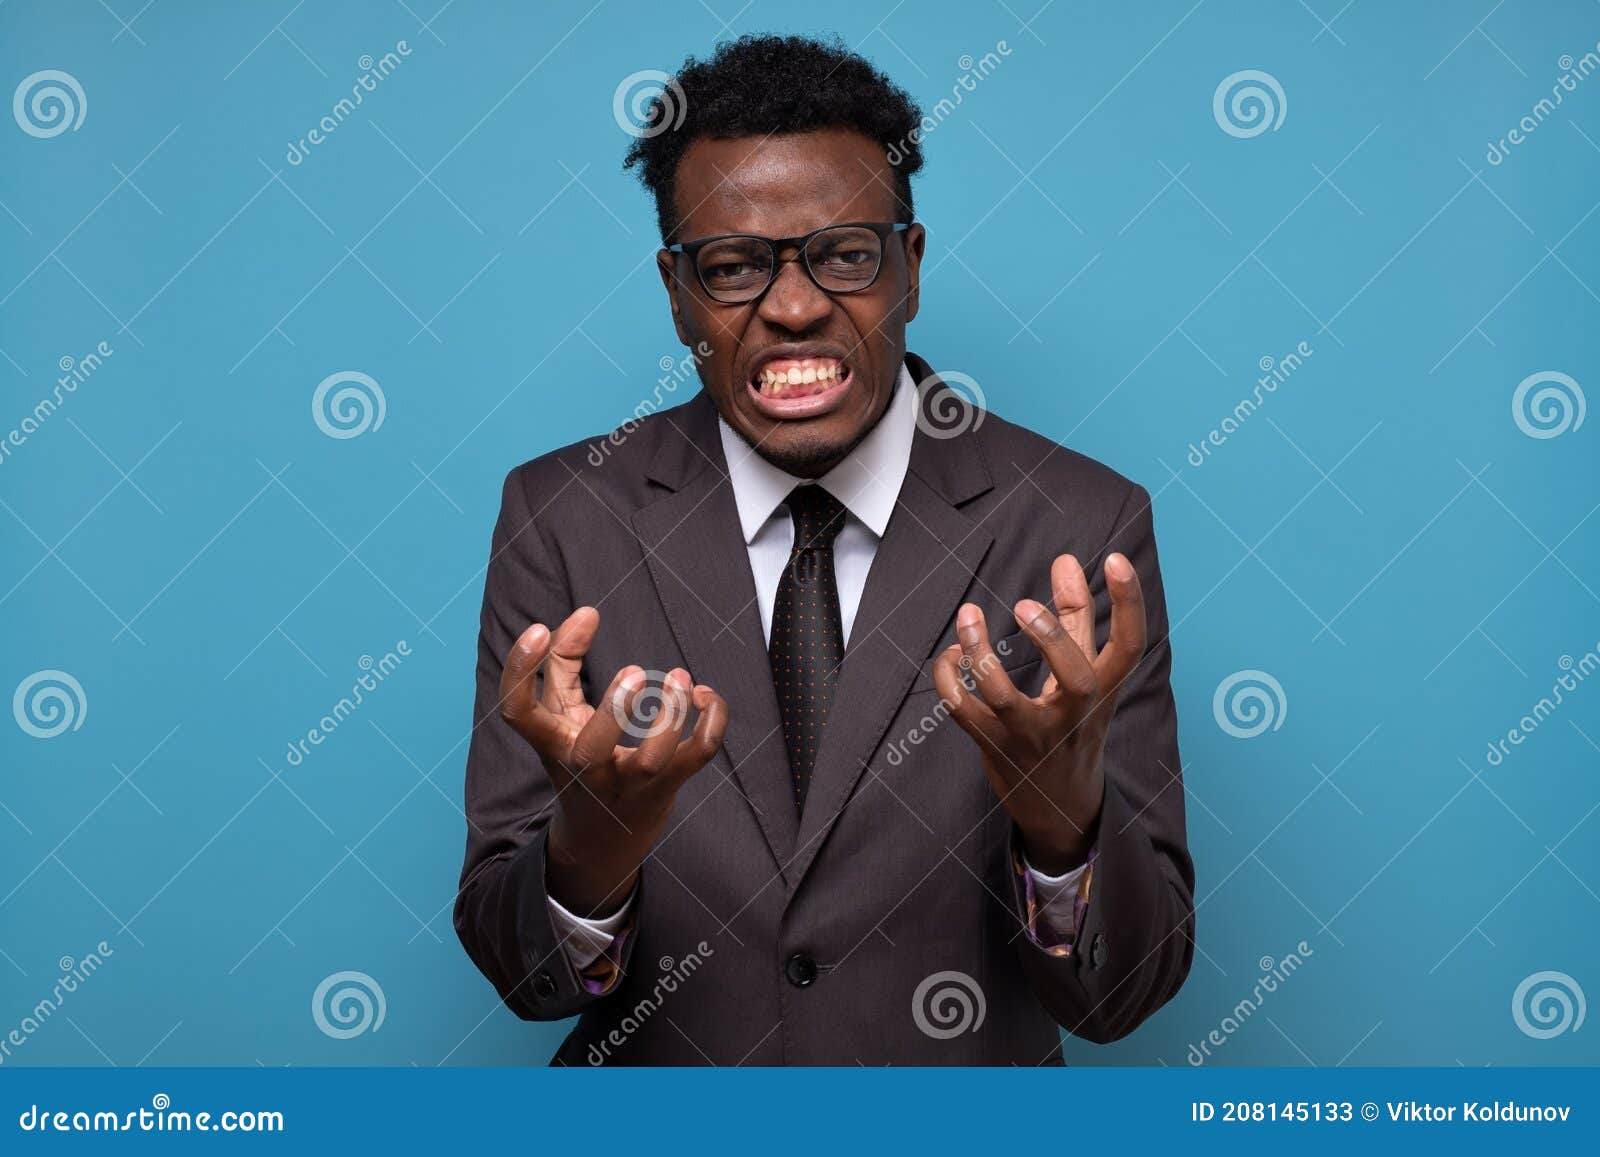 African American Funny Man in Suit Being Furious and Angry Clenching ...